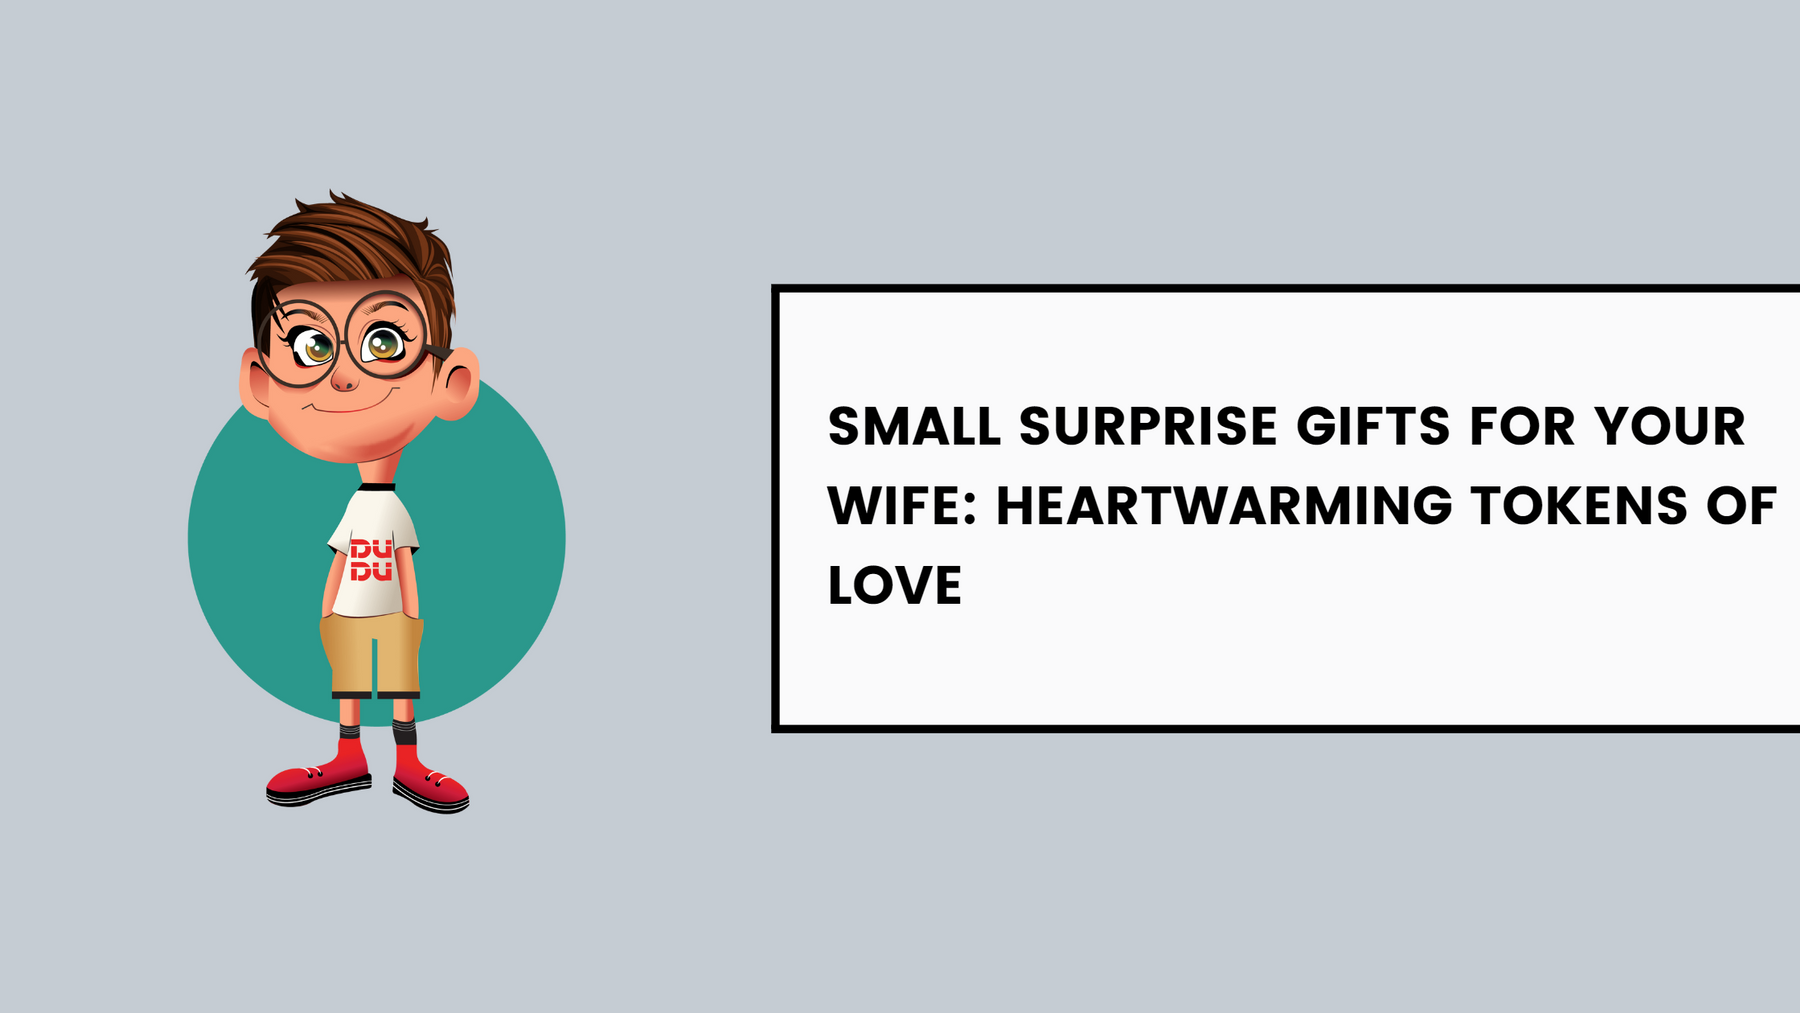 Small Surprise Gifts For Your Wife: Heartwarming Tokens Of Love